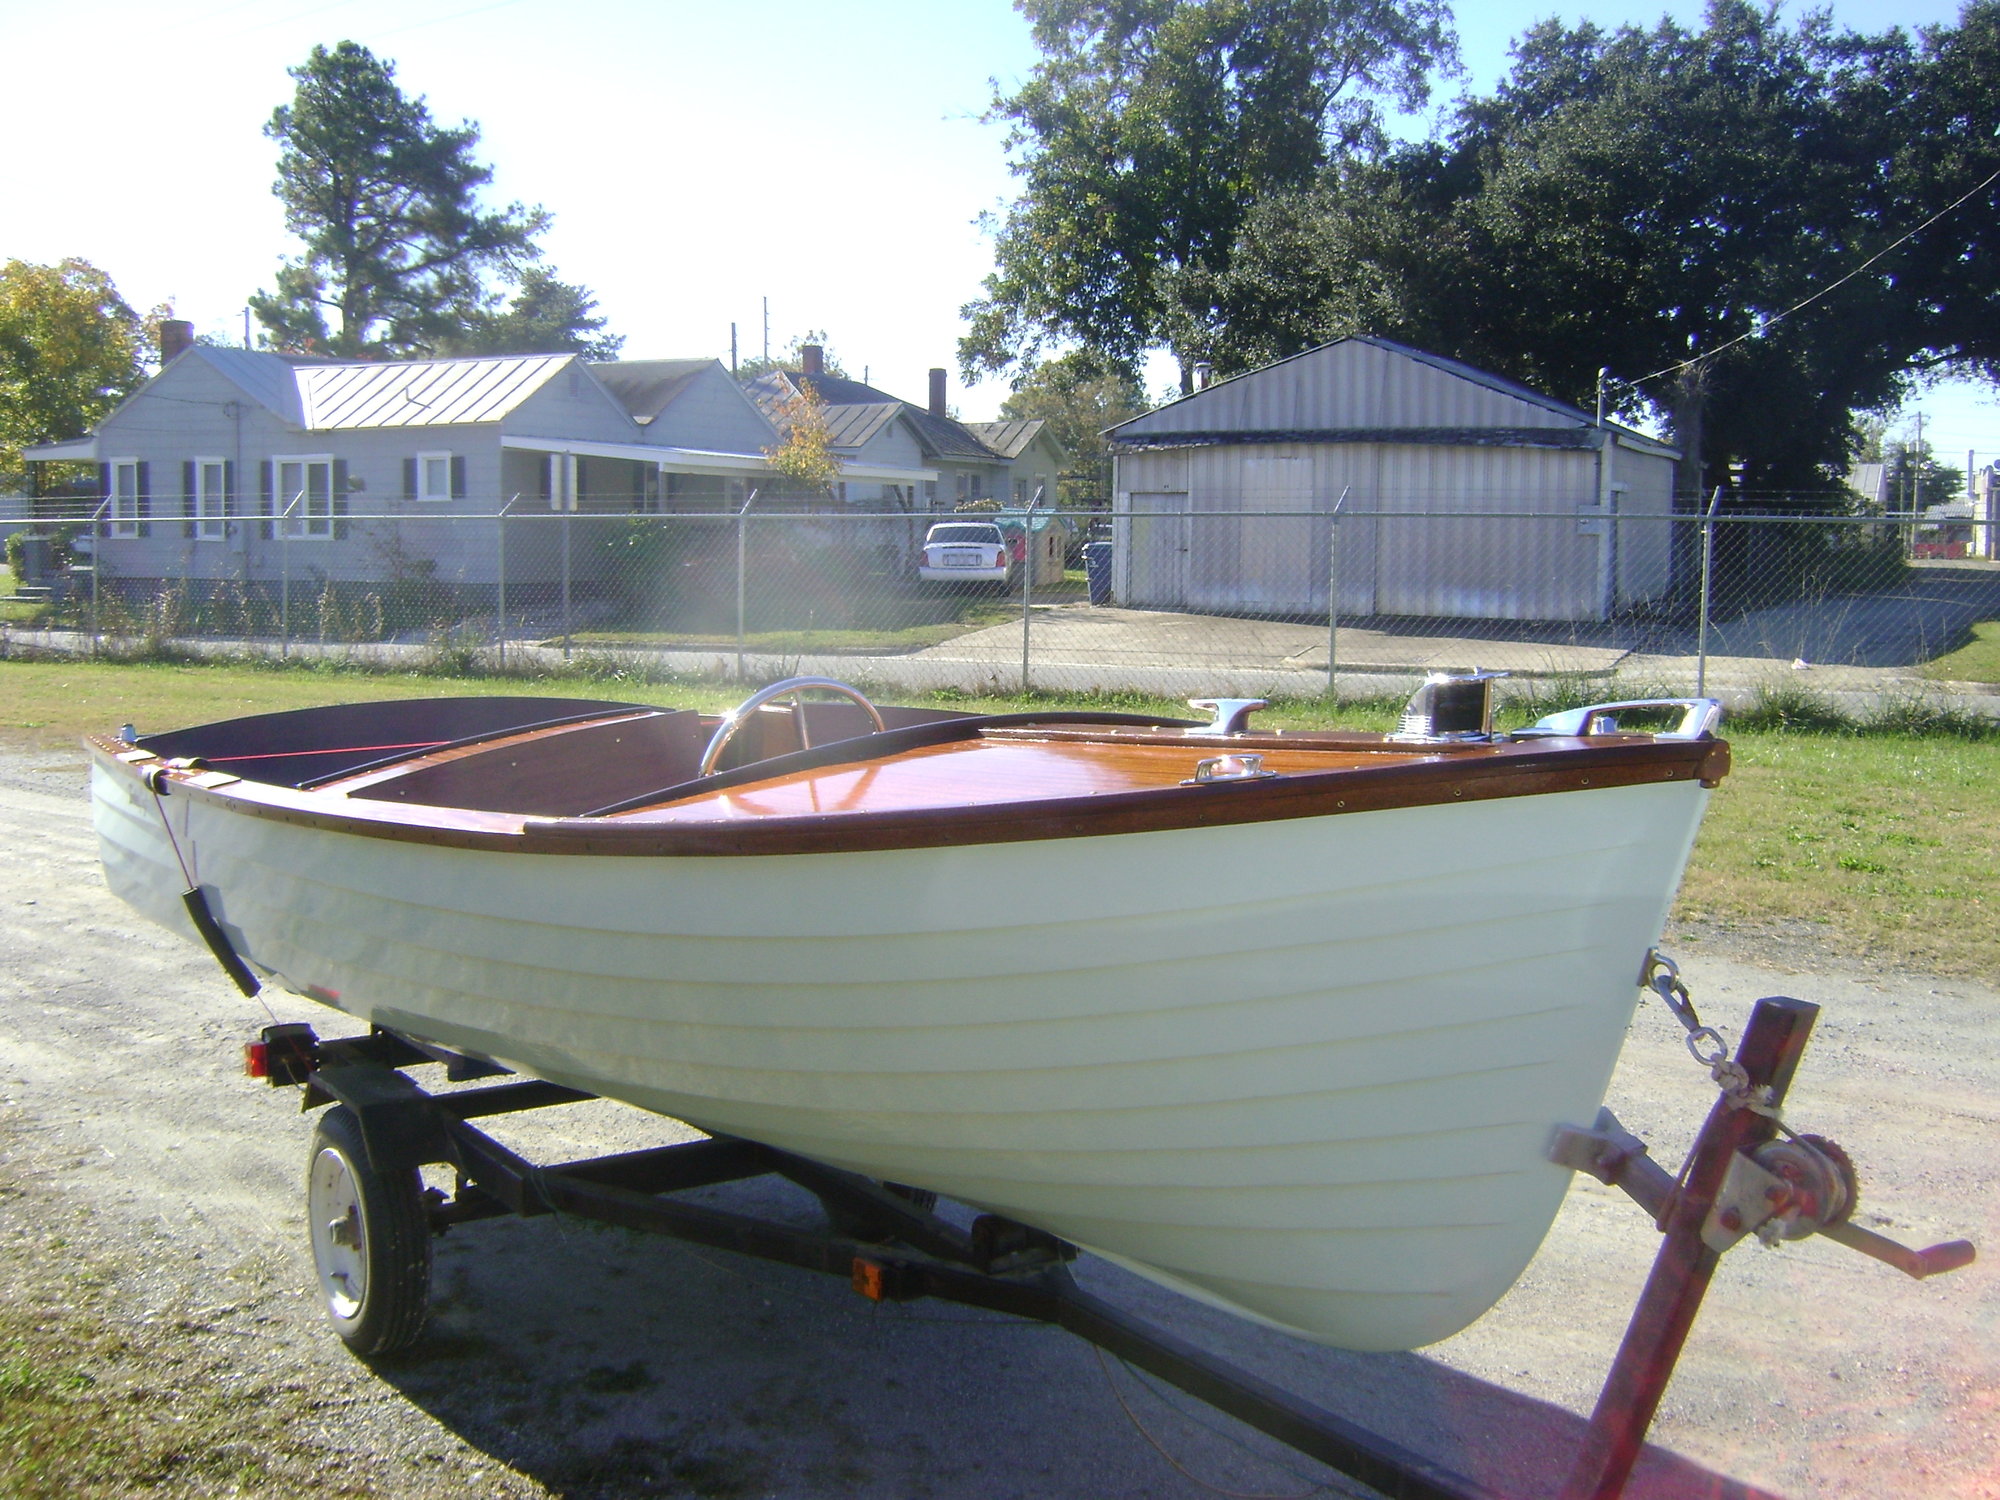 beautiful plywood boats. - page 4 - the hull truth